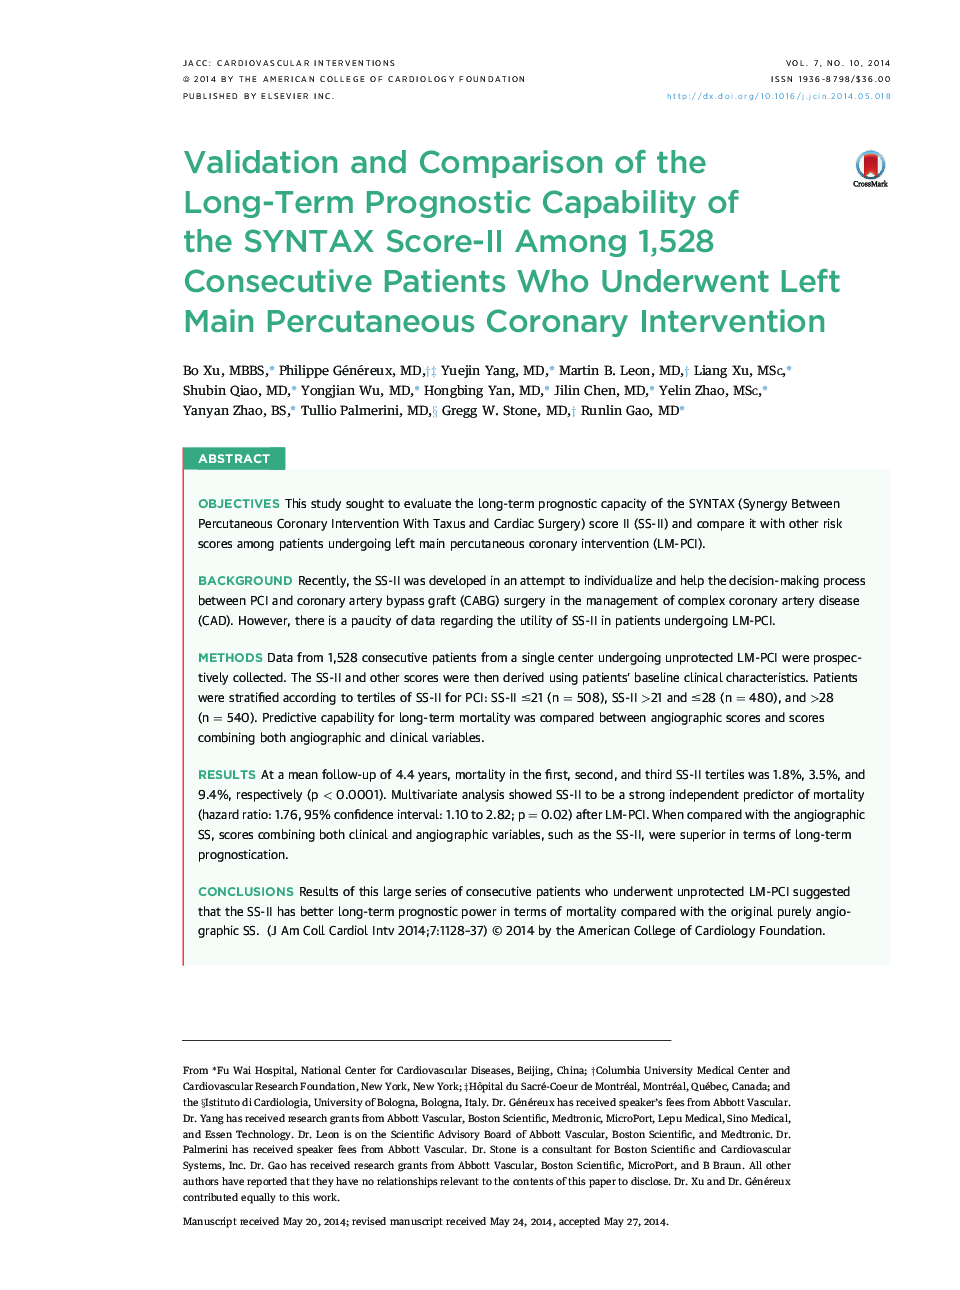 Validation and Comparison of the Long-Term Prognostic Capability of the SYNTAX Score-II Among 1,528 Consecutive Patients Who Underwent Left Main Percutaneous Coronary Intervention 